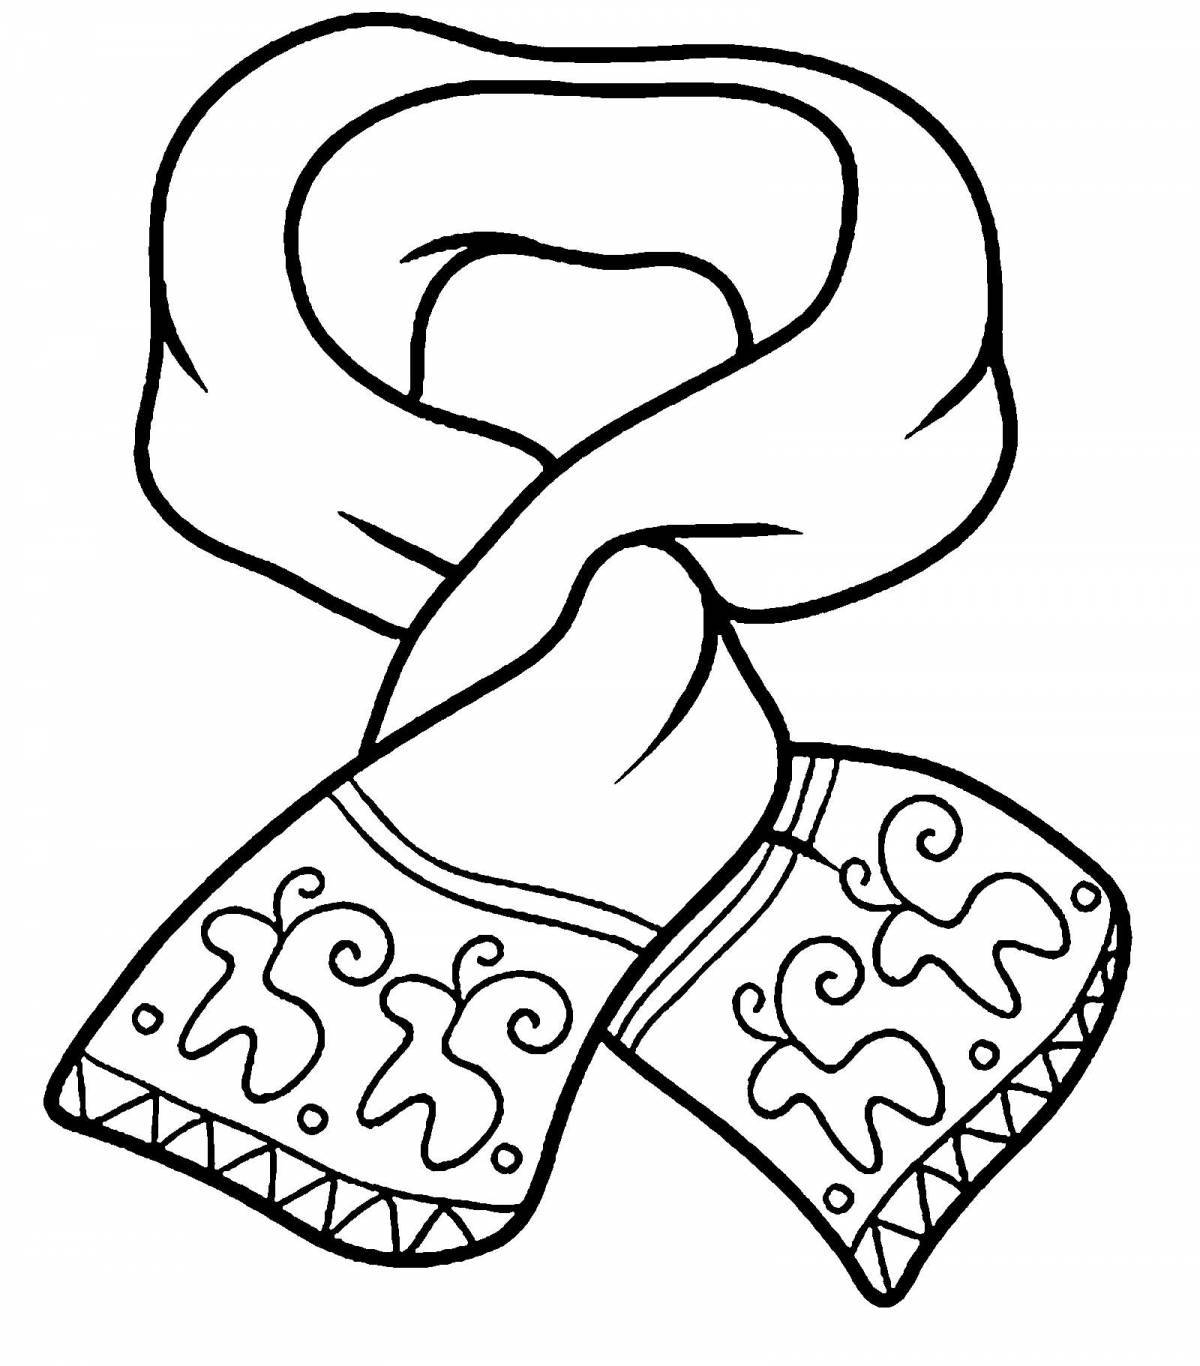 Live scarf coloring page for kids